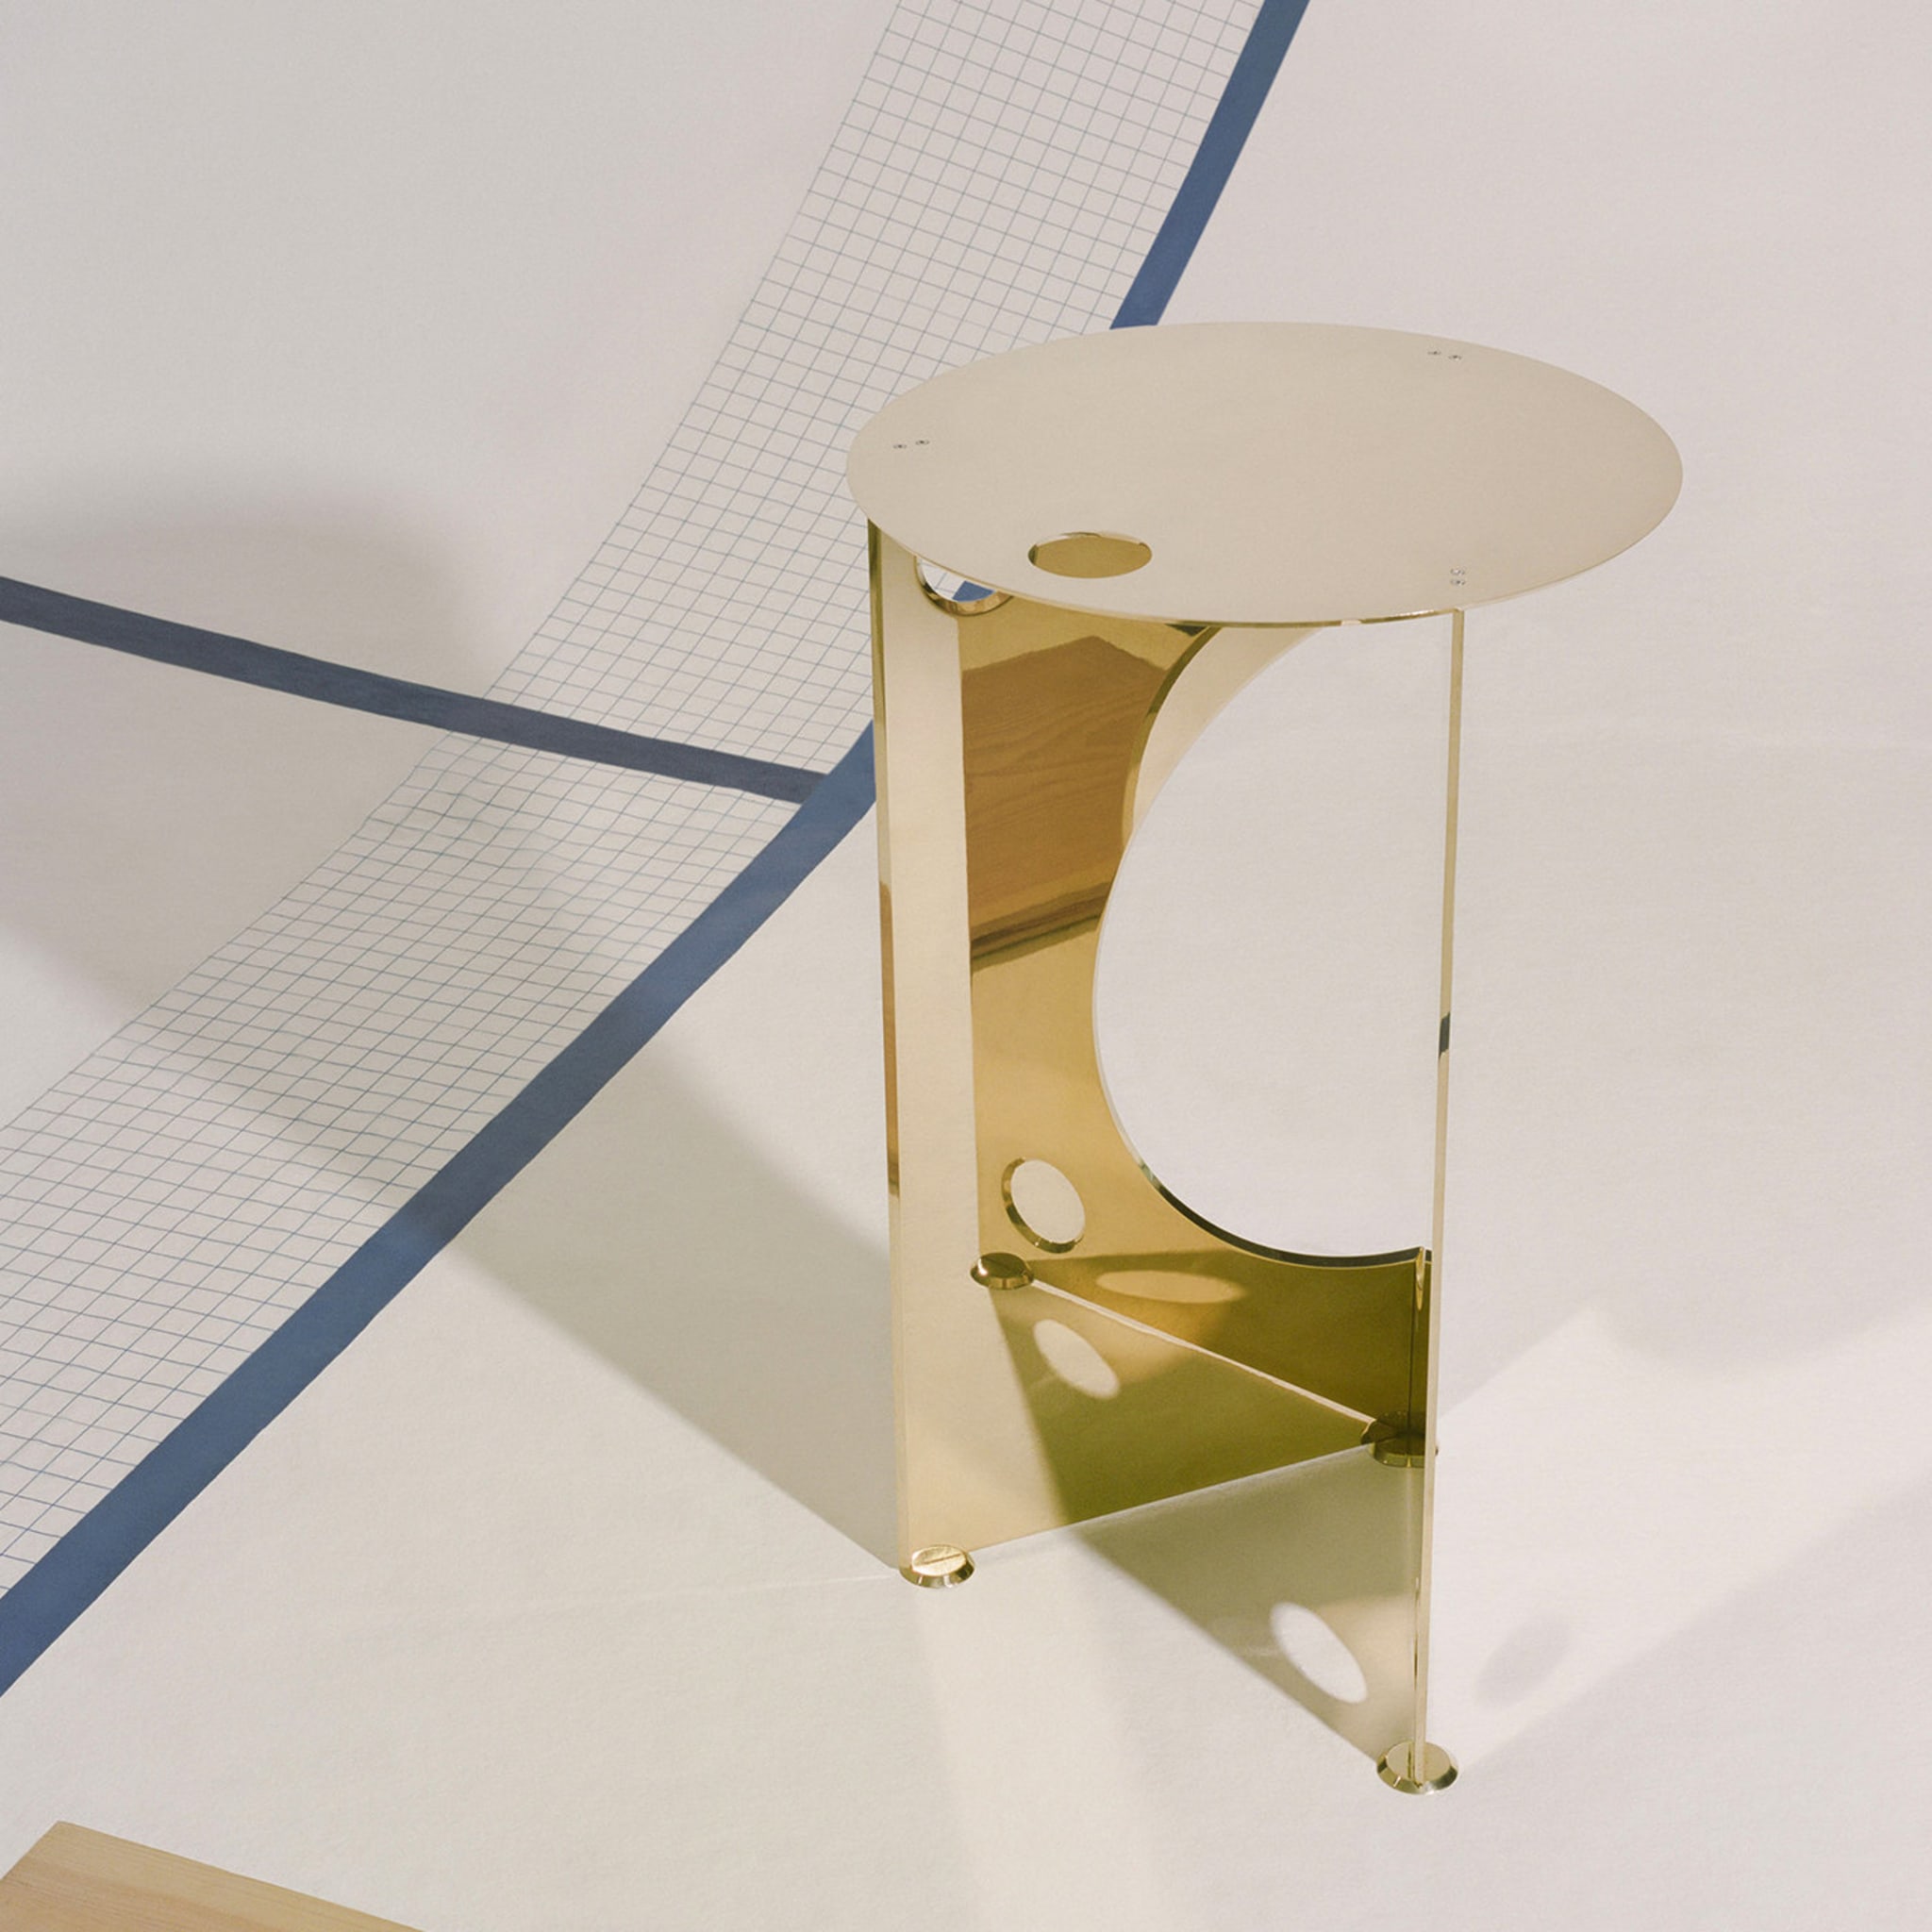 One Side Table in Polished Brass - Alternative view 1